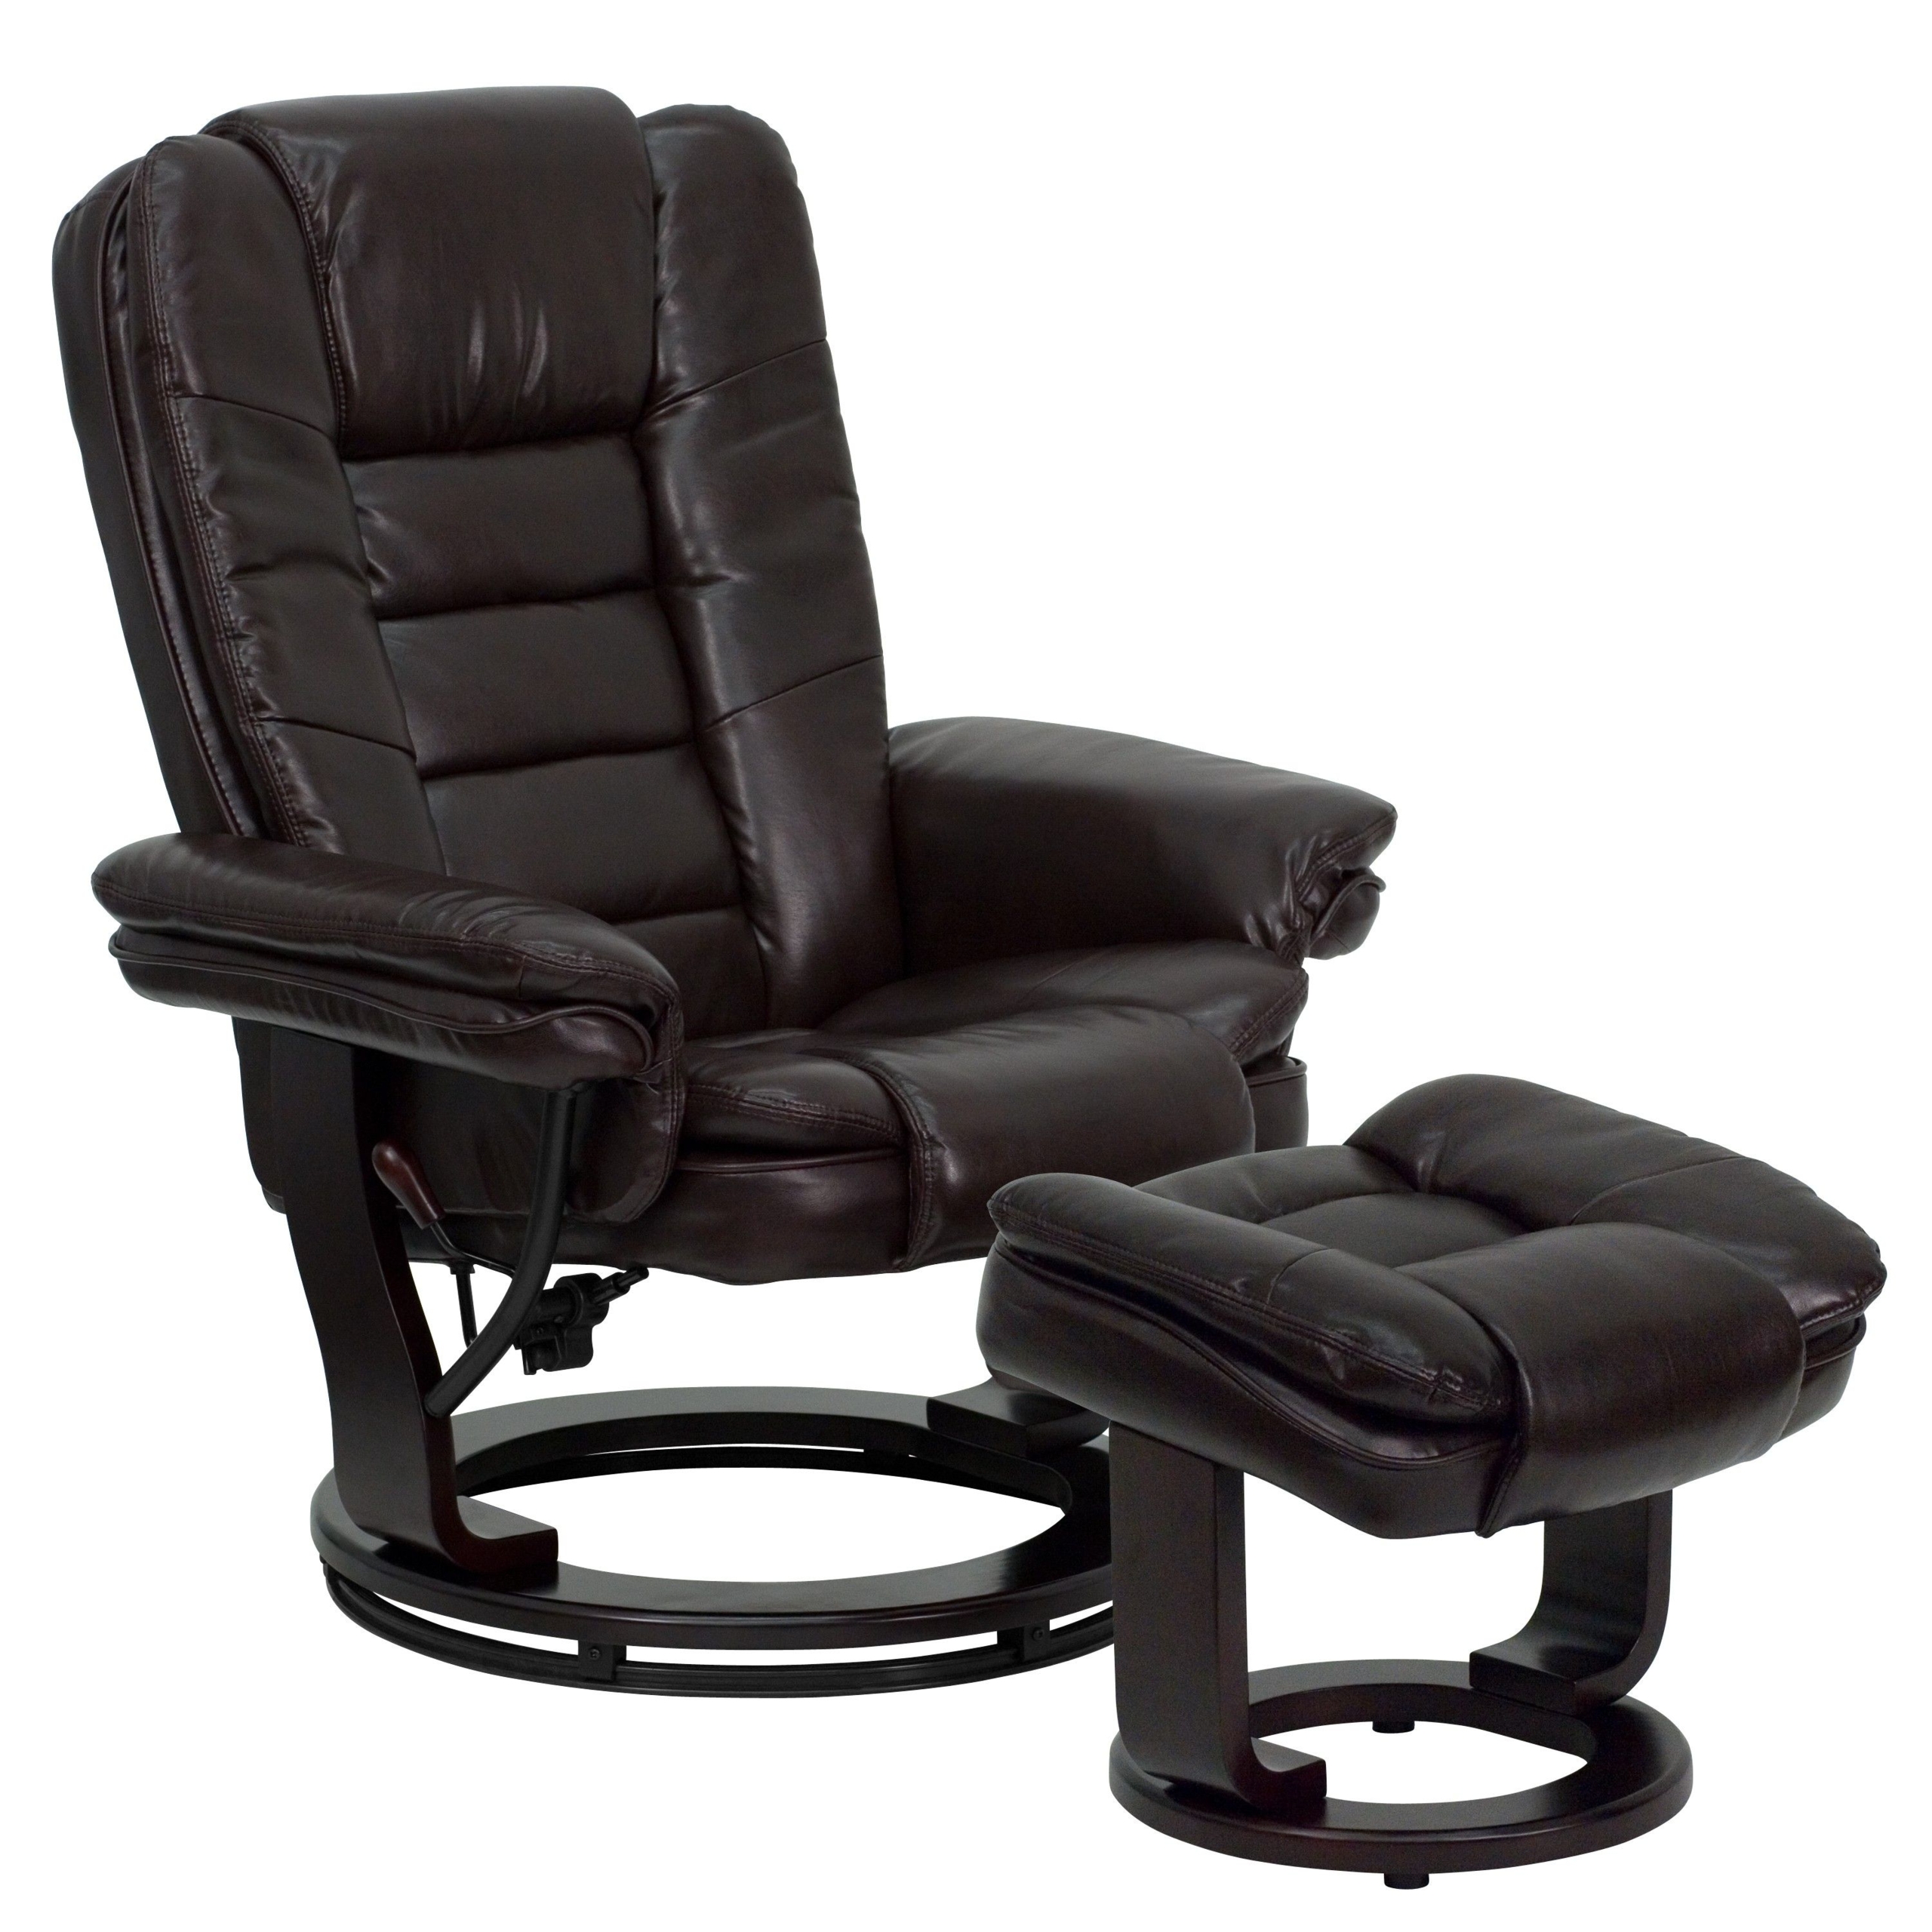 Reclining chair and ottoman